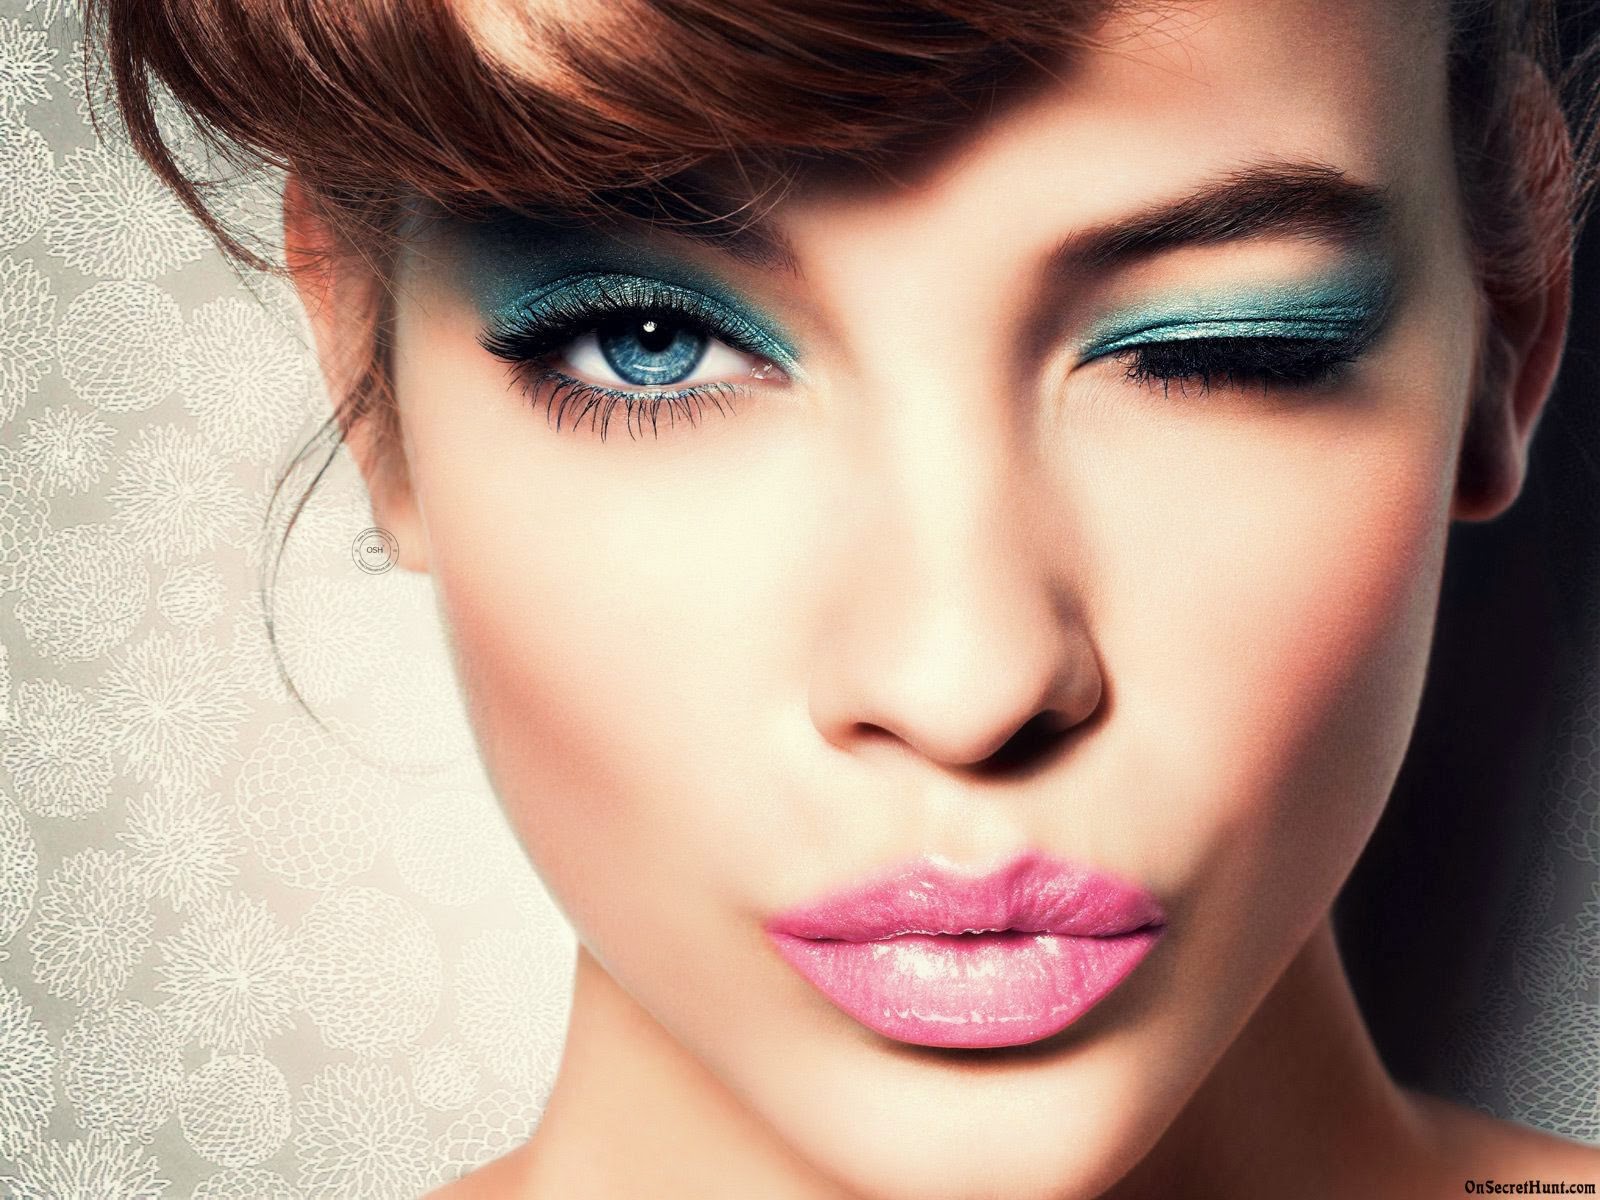 http://sidesofstyle.blogspot.com/2013/12/5-make-up-tips-to-look-better-in-photos.html